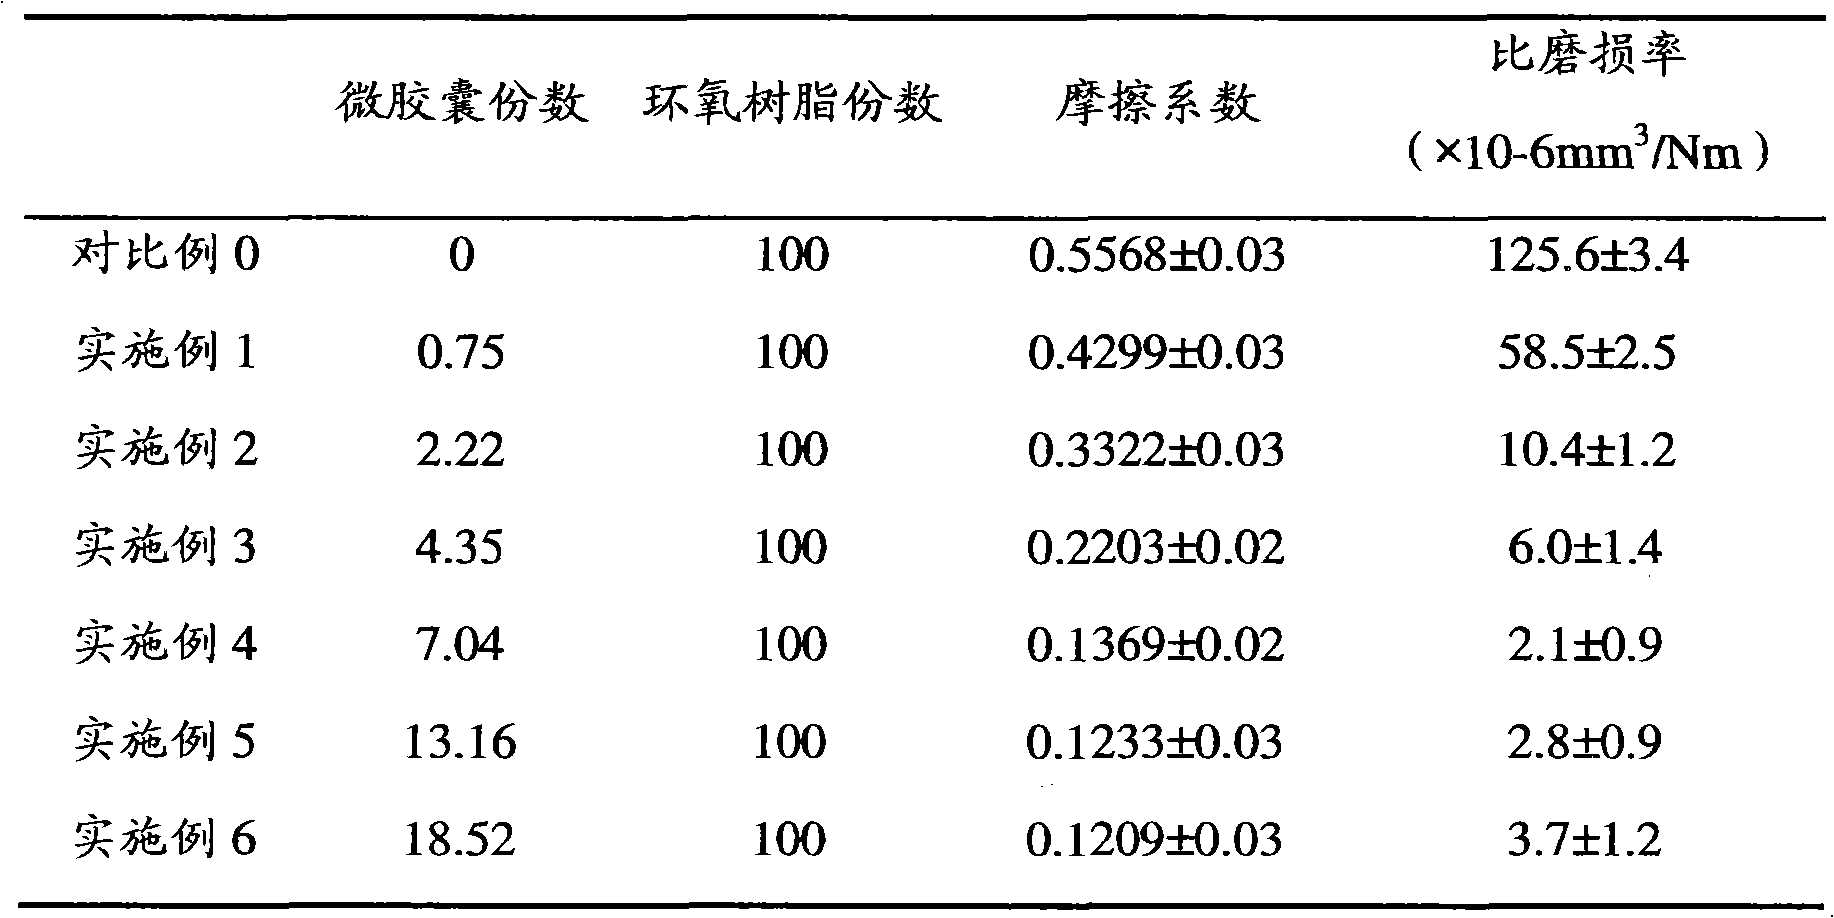 Self-lubricating type epoxide resin material and preparation thereof